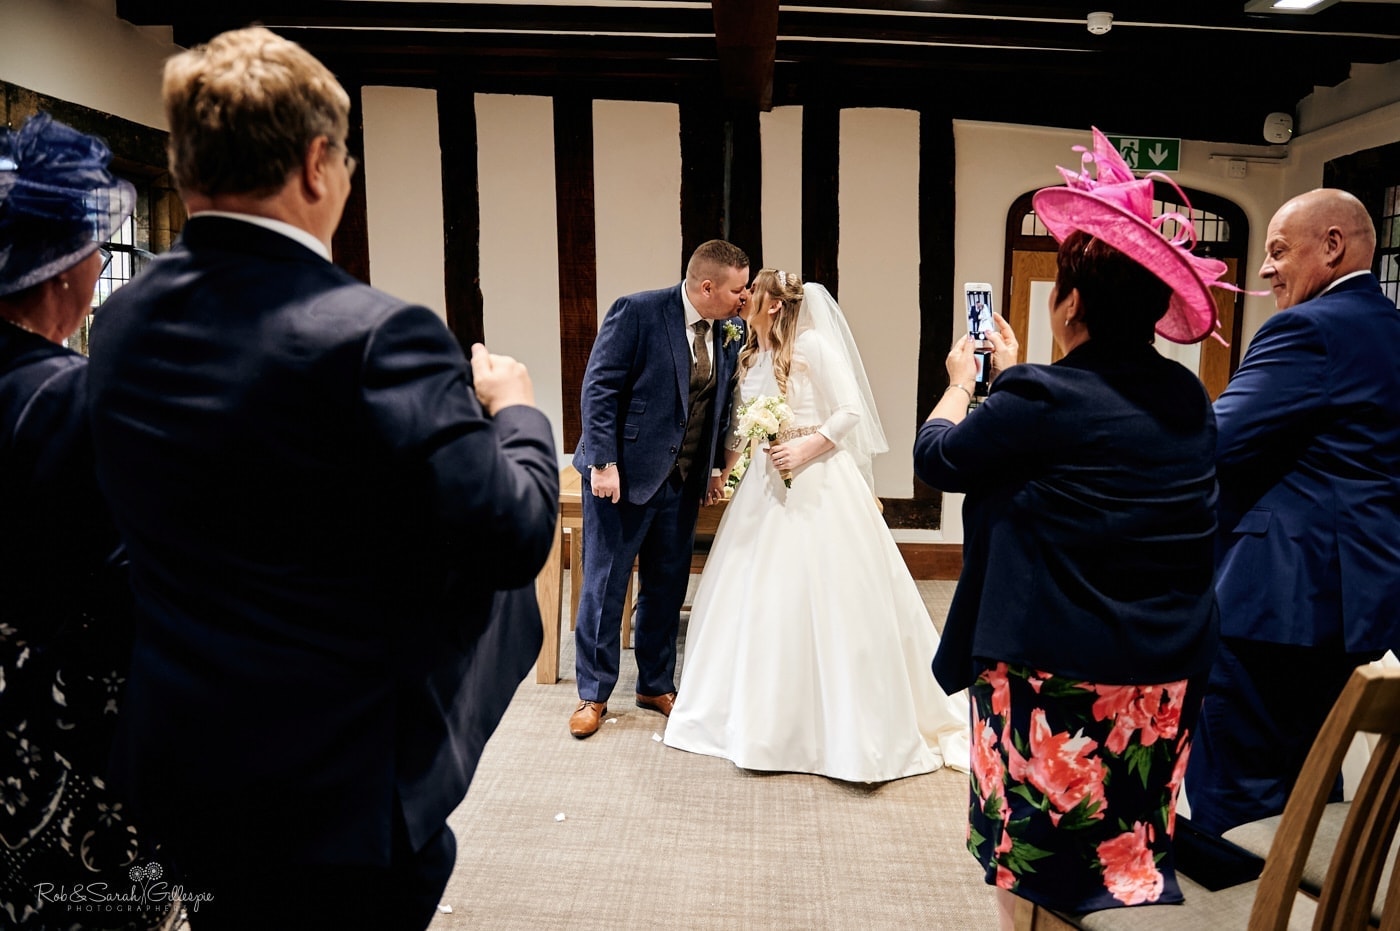 Bride and groom kiss before leaving wedding ceremony in The Henley Room